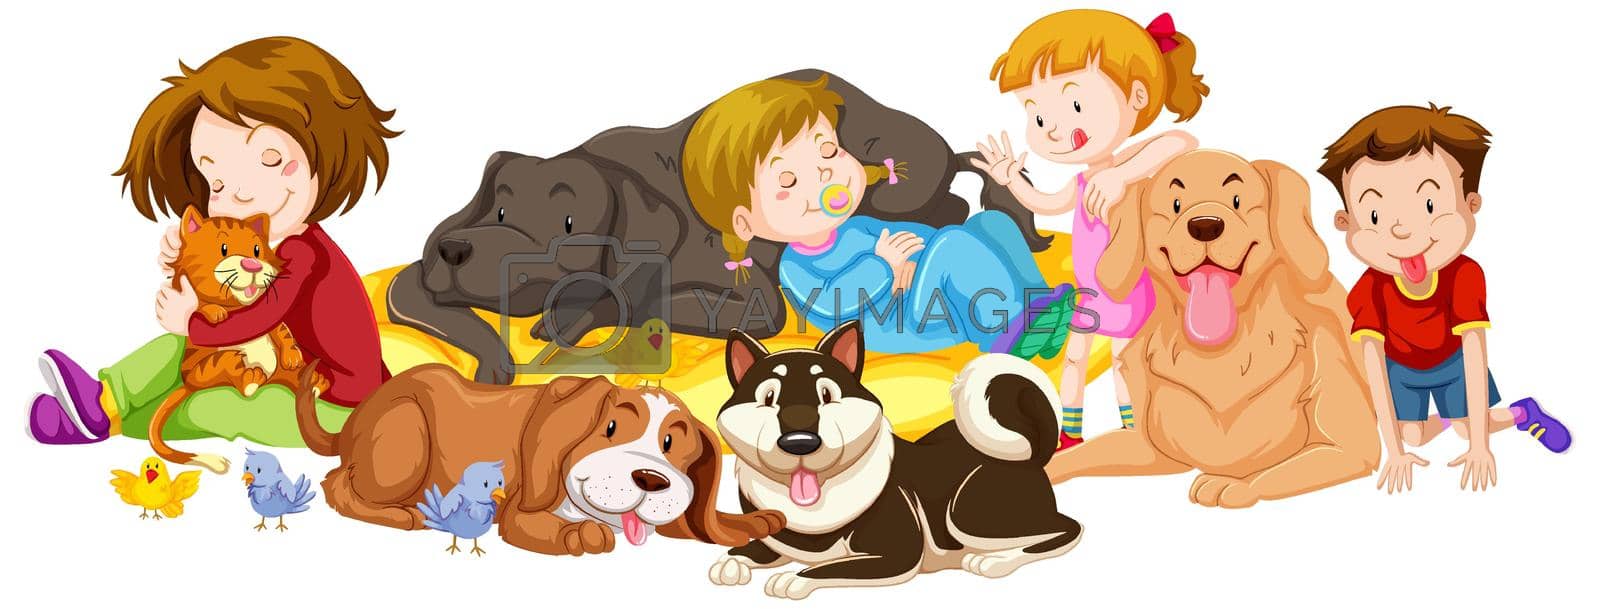 Many kids and pets on white background illustration